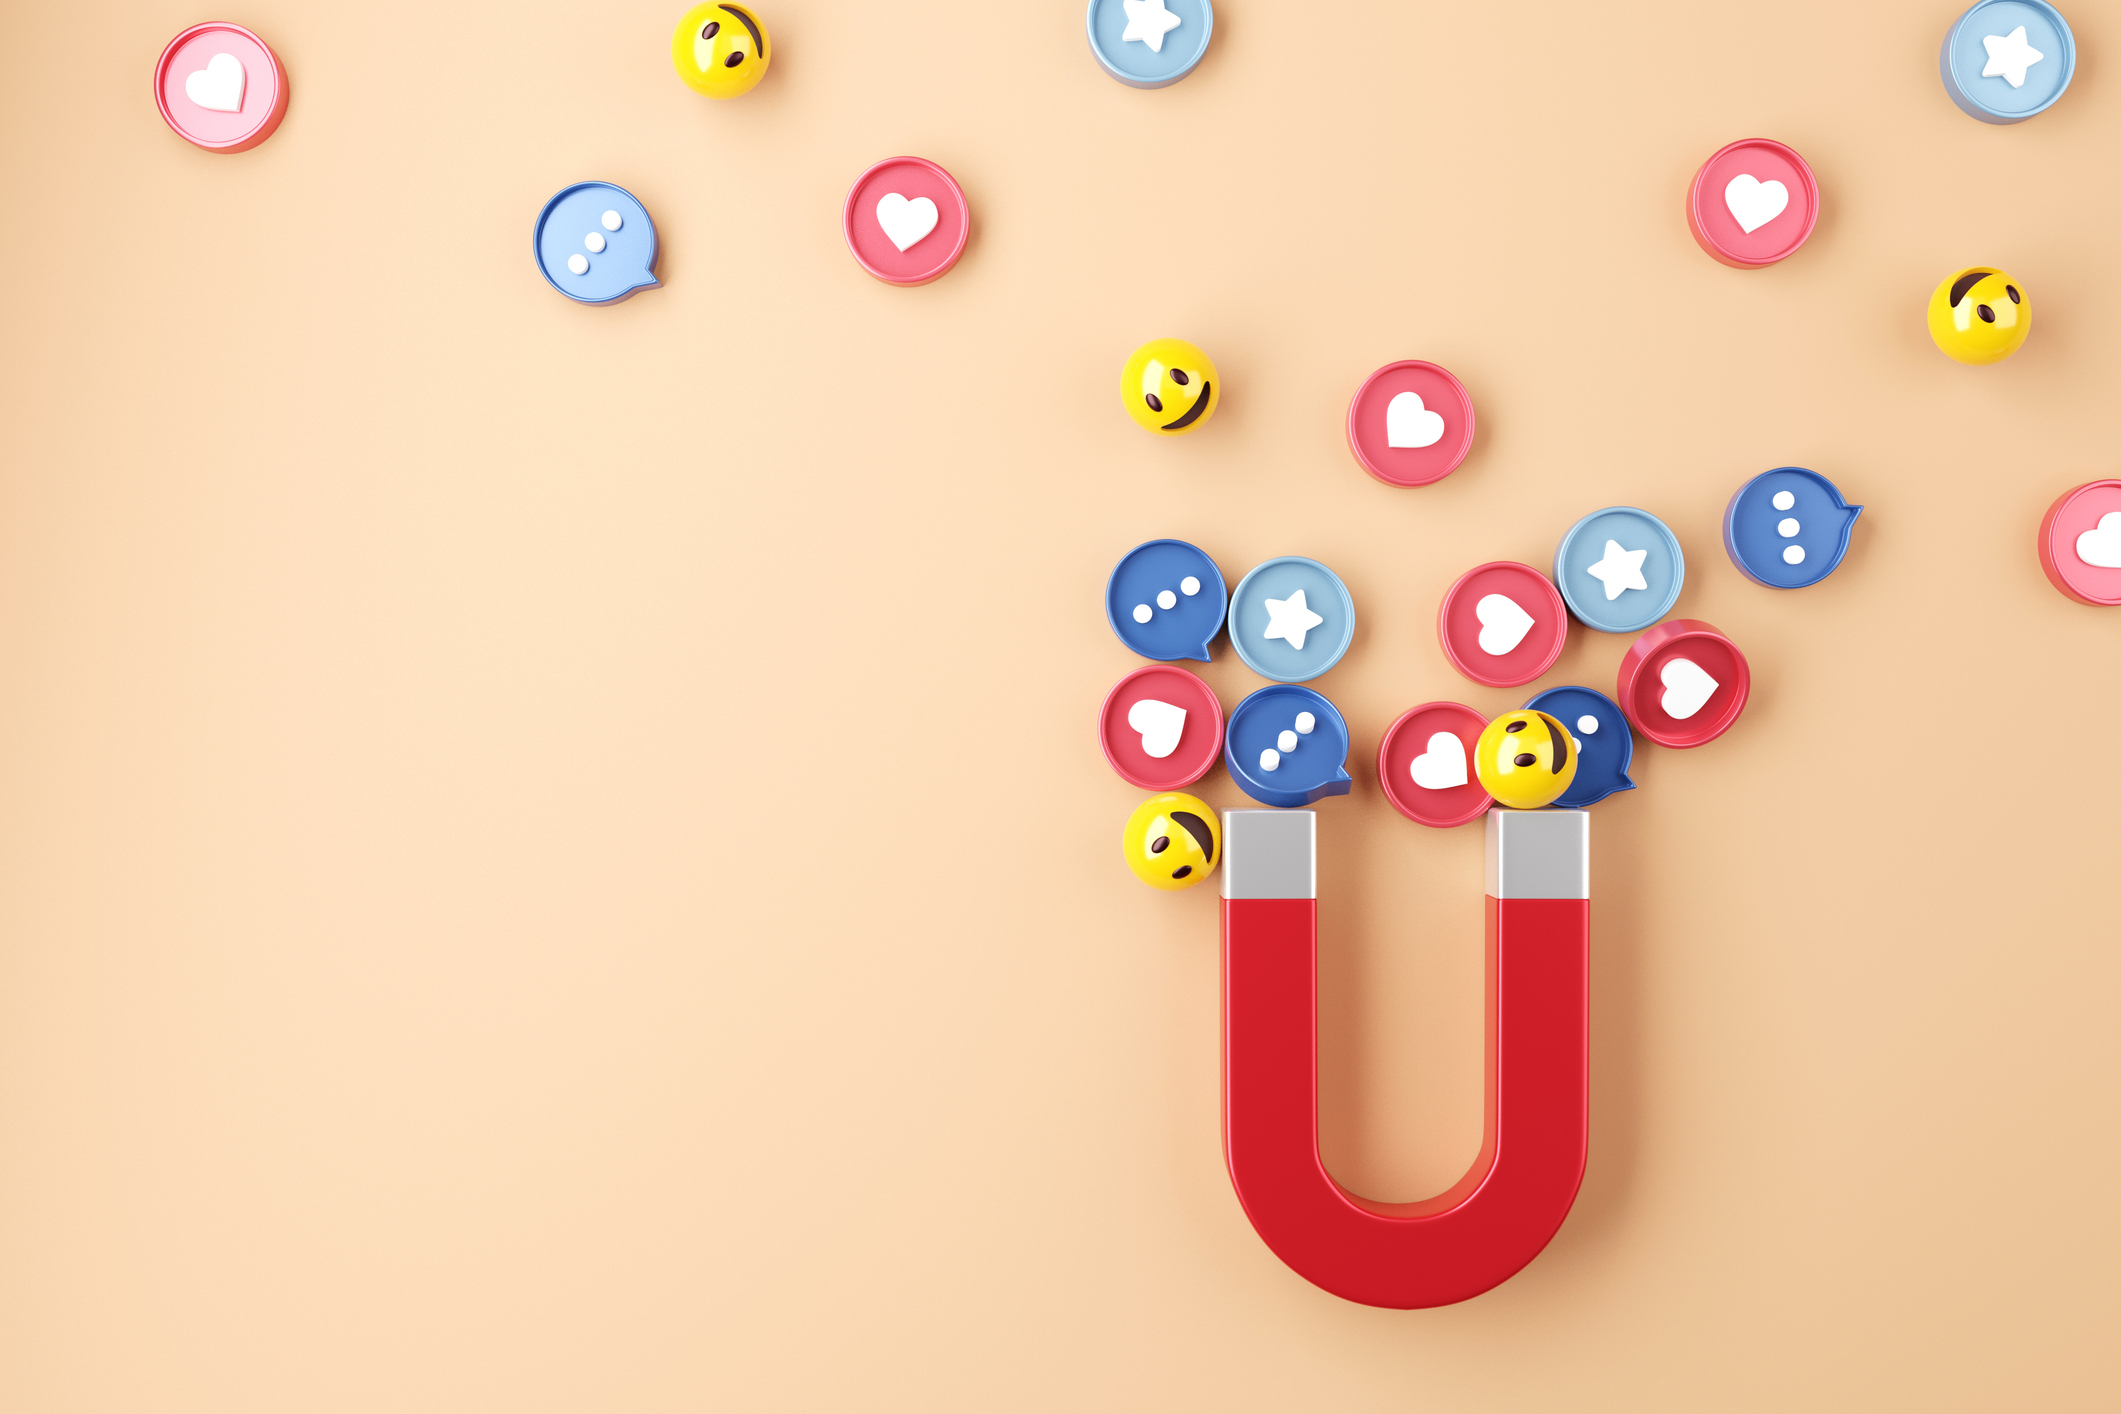 Stock Image Graphic of U-shaped Magnet Attracting Small Social Media Heart Comment and Smiling Buttons